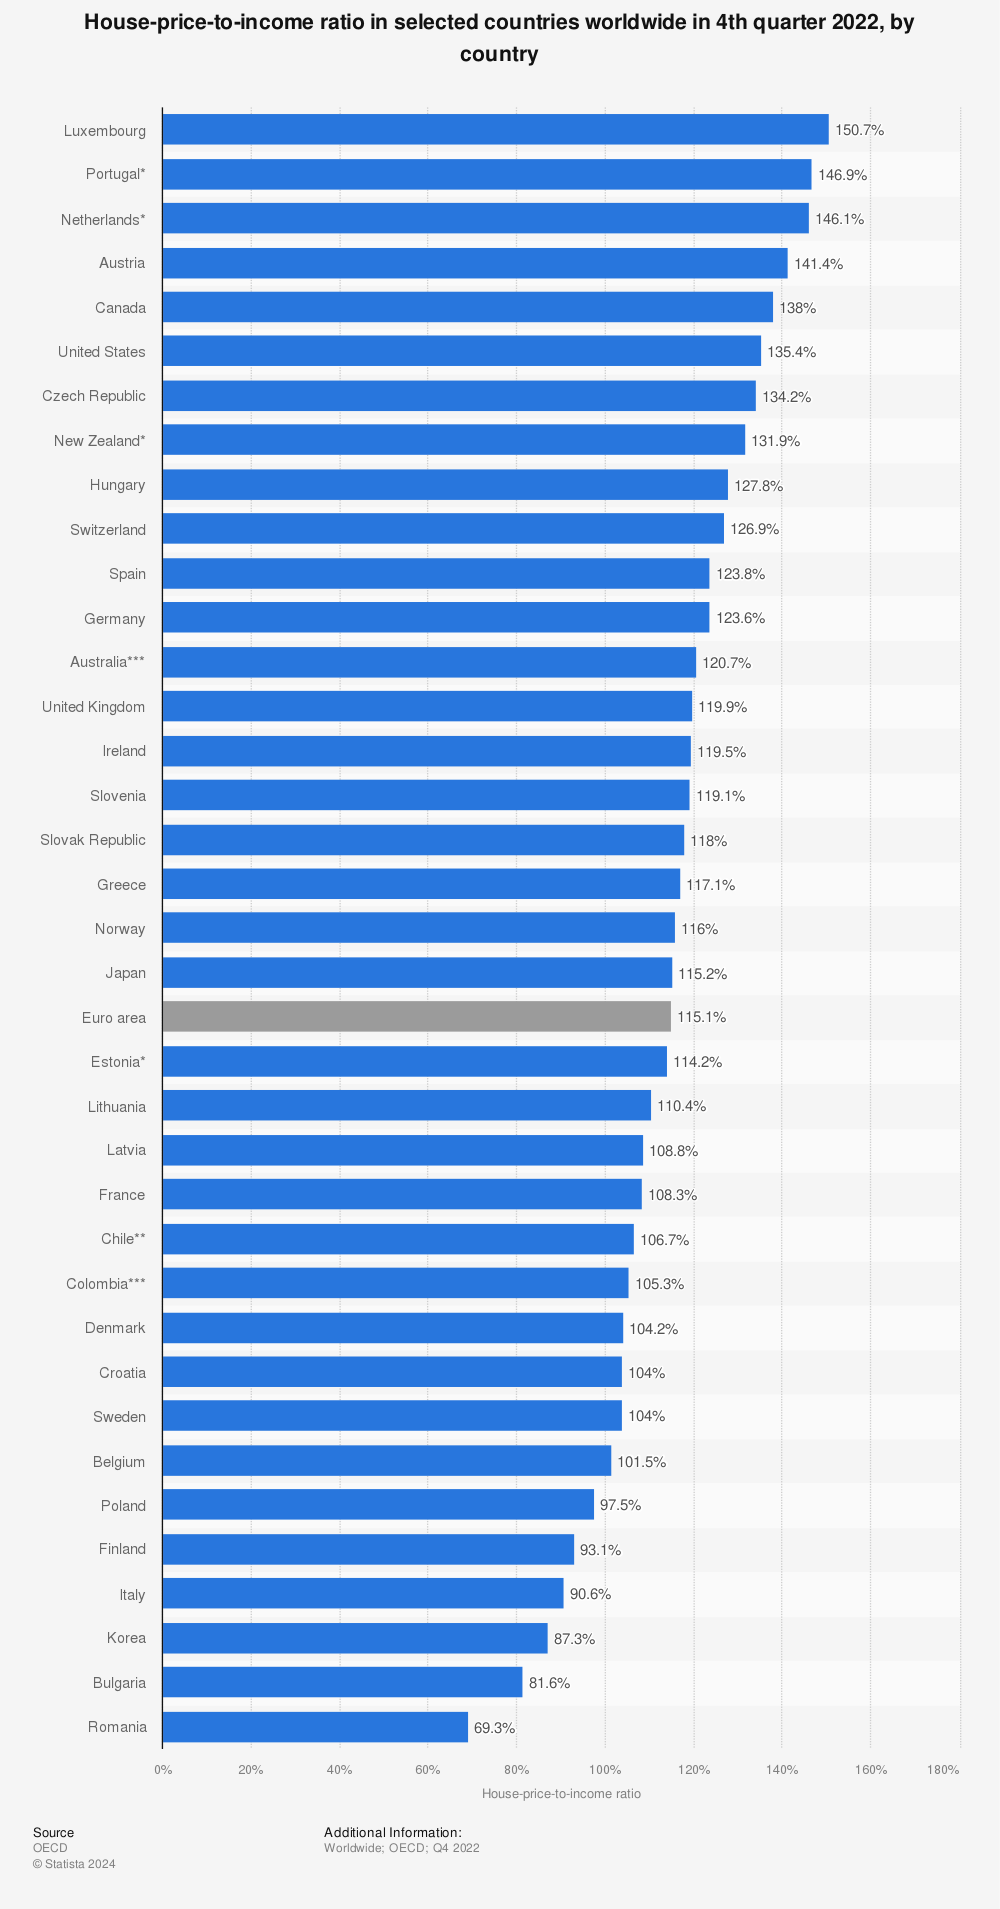 Statistic: House-price-to-income ratio in selected countries worldwide as of 2nd quarter 2022, by country | Statista